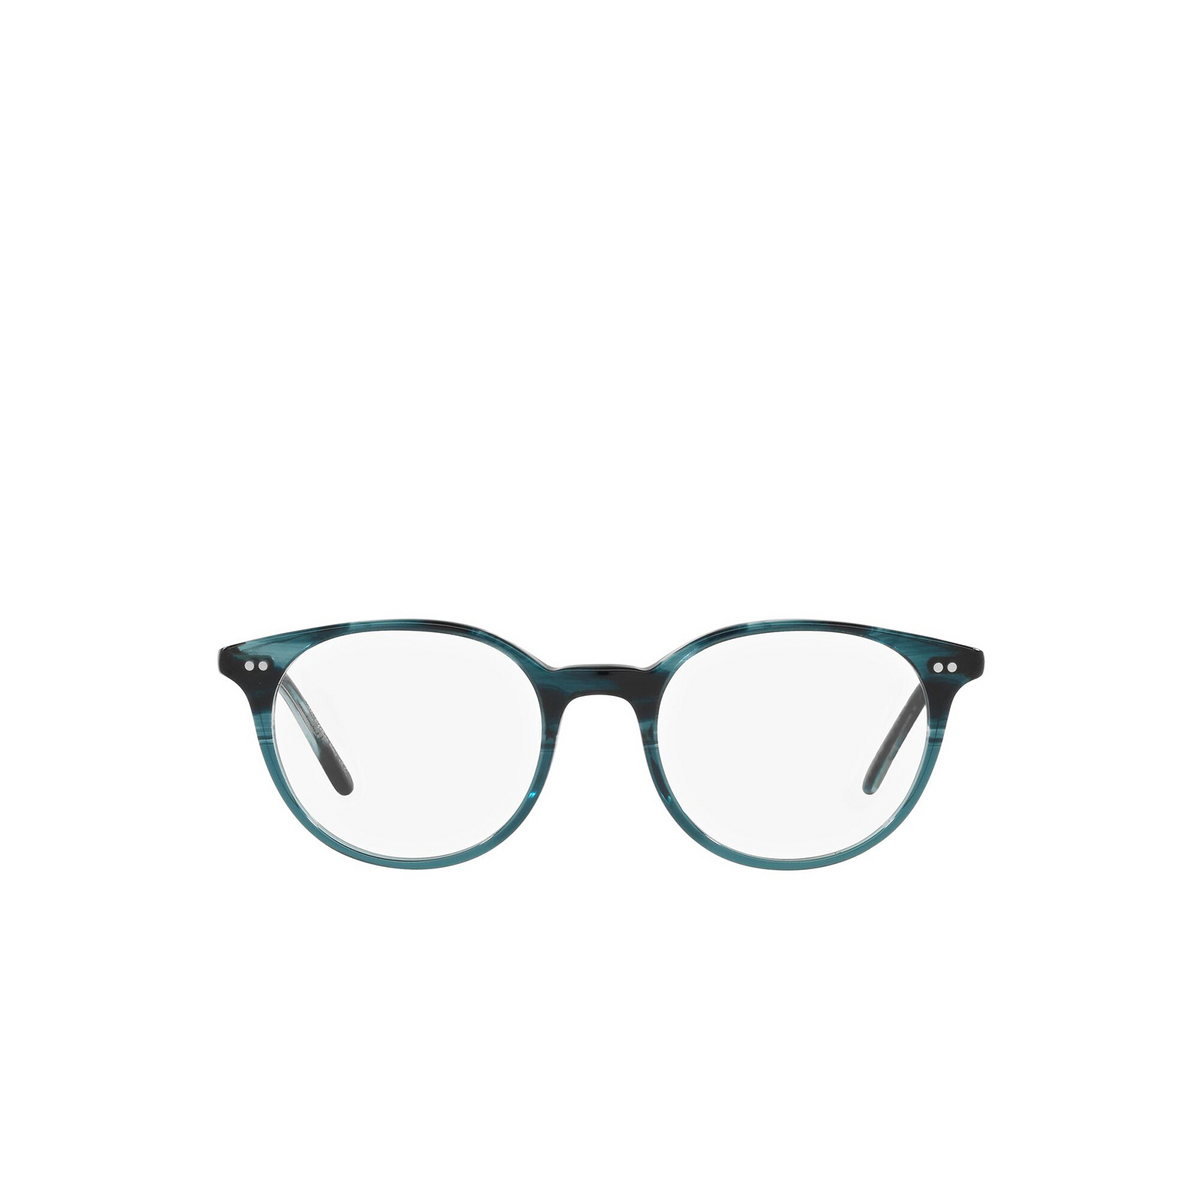 Oliver Peoples MIKETT Eyeglasses 1672 Teal Vsb - front view